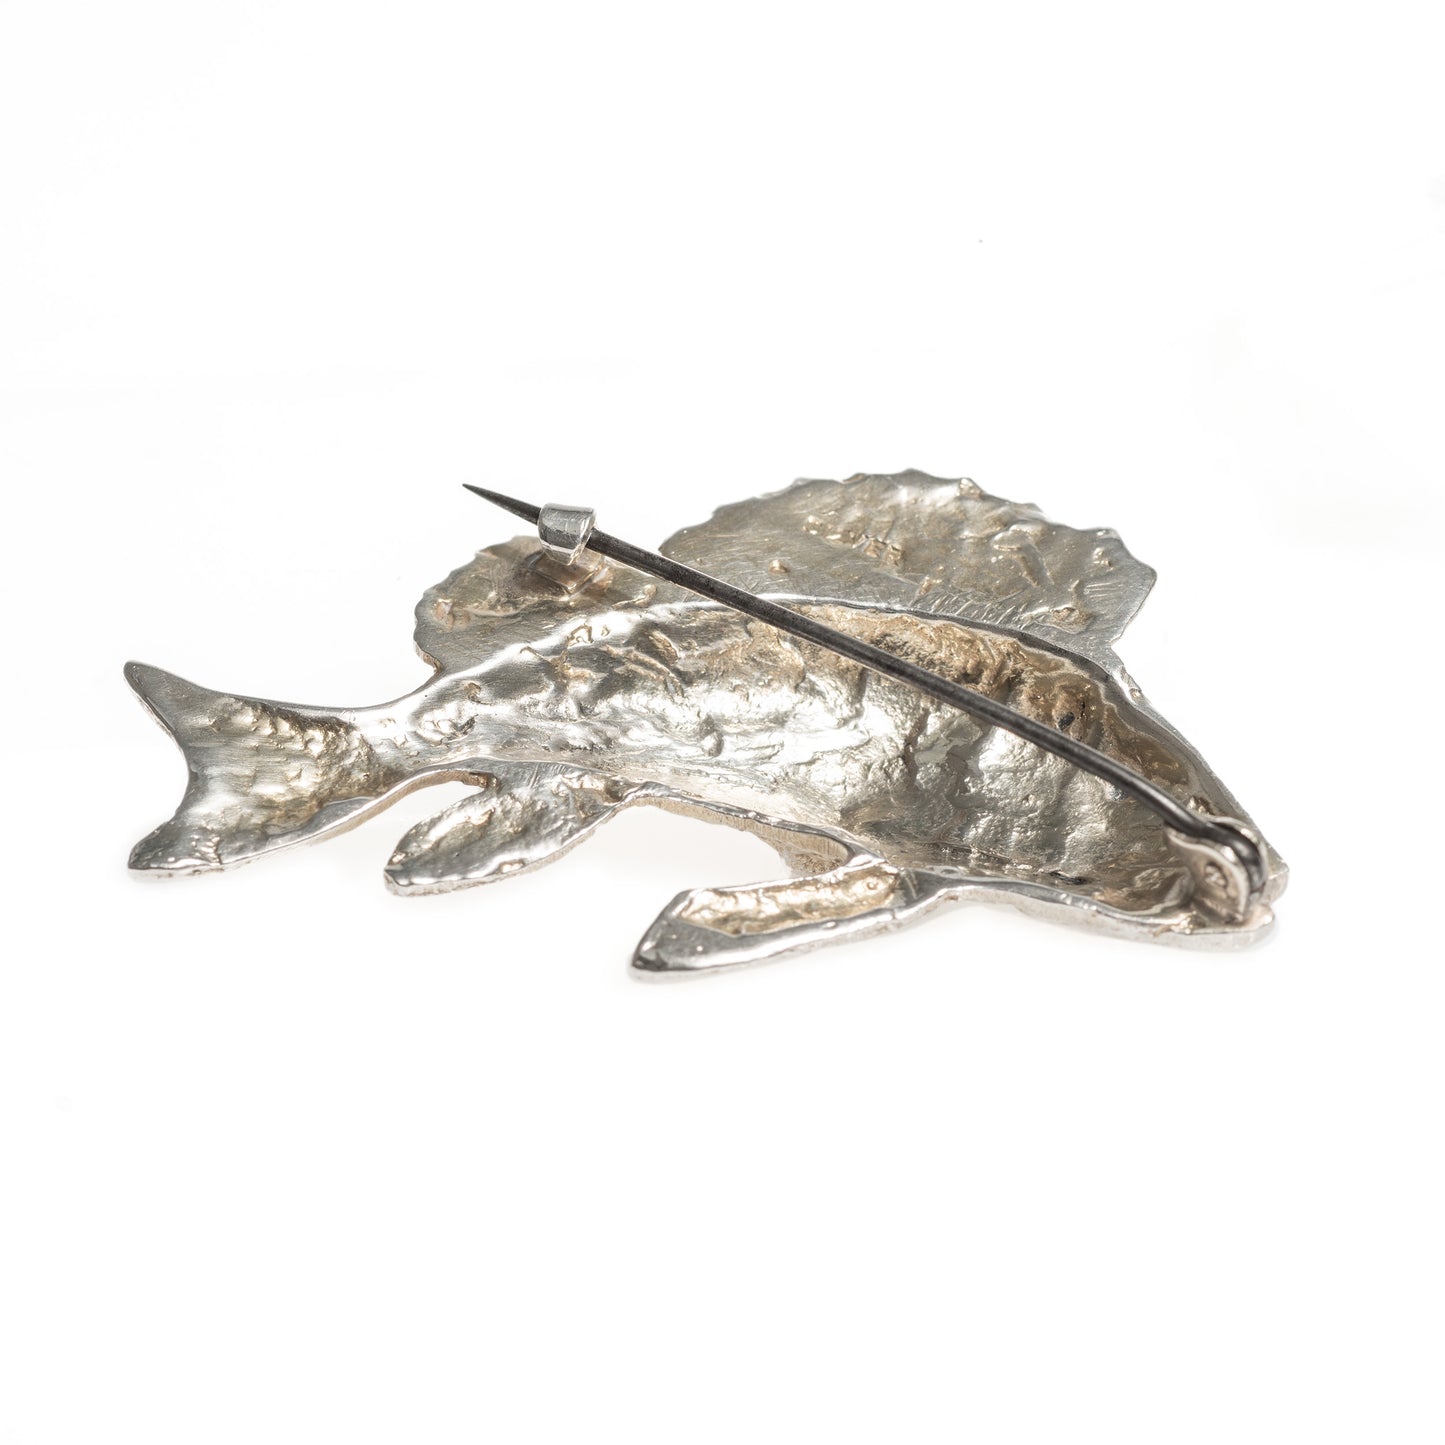 Antique Silver Gilt Perch Fish Brooch Pin Early 20th Century With Red Gem Eye (Code A402)